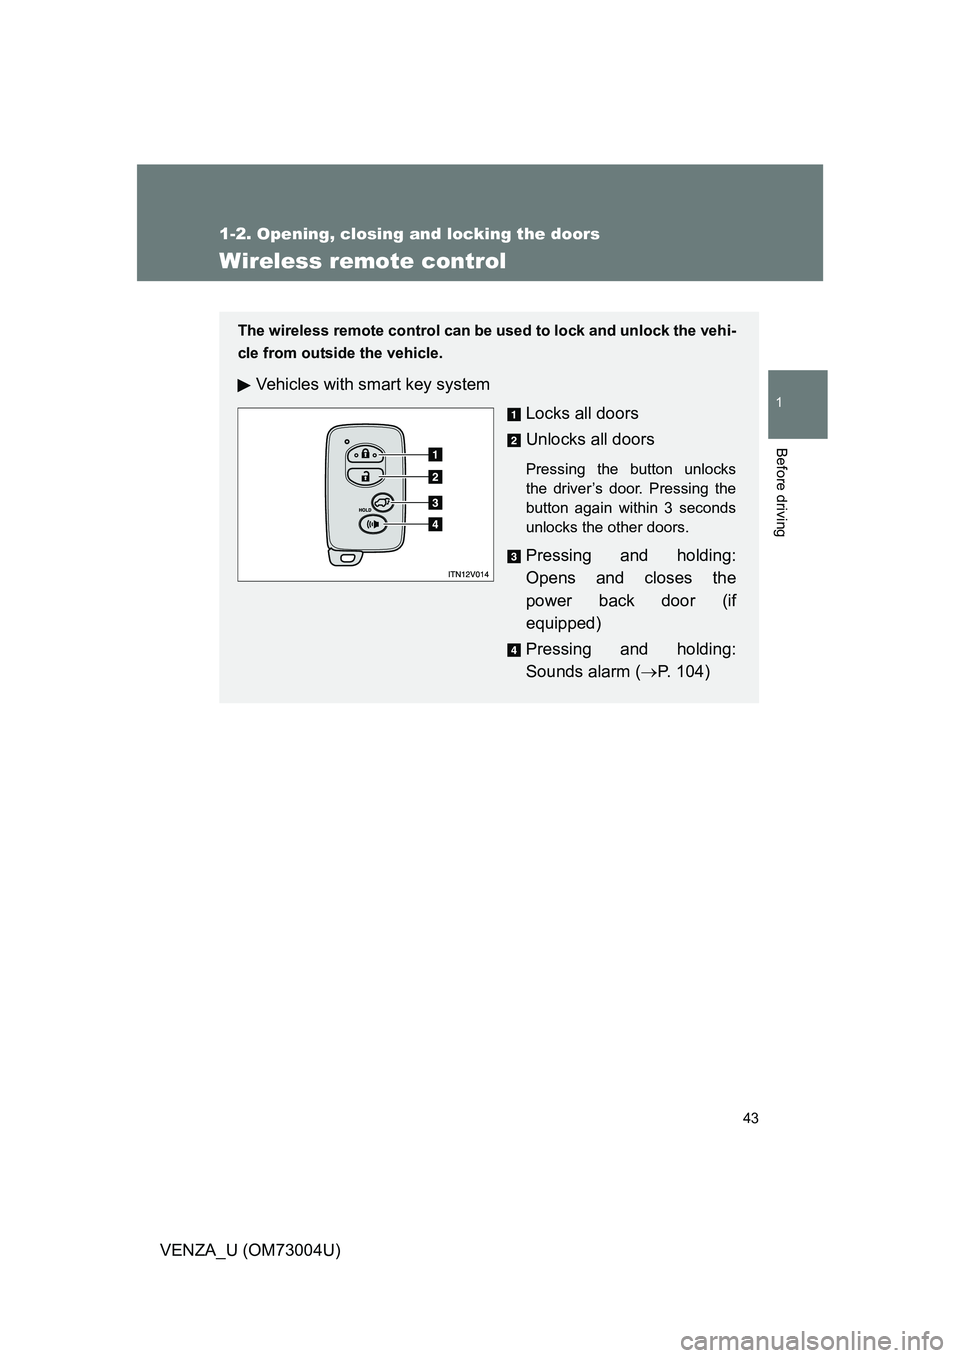 TOYOTA VENZA 2009   (in English) Owners Manual 43
1
1-2. Opening, closing and locking the doors
Before driving
VENZA_U (OM73004U)
Wireless remote control
The wireless remote control can be used to lock and unlock the vehi-
cle from outside the veh